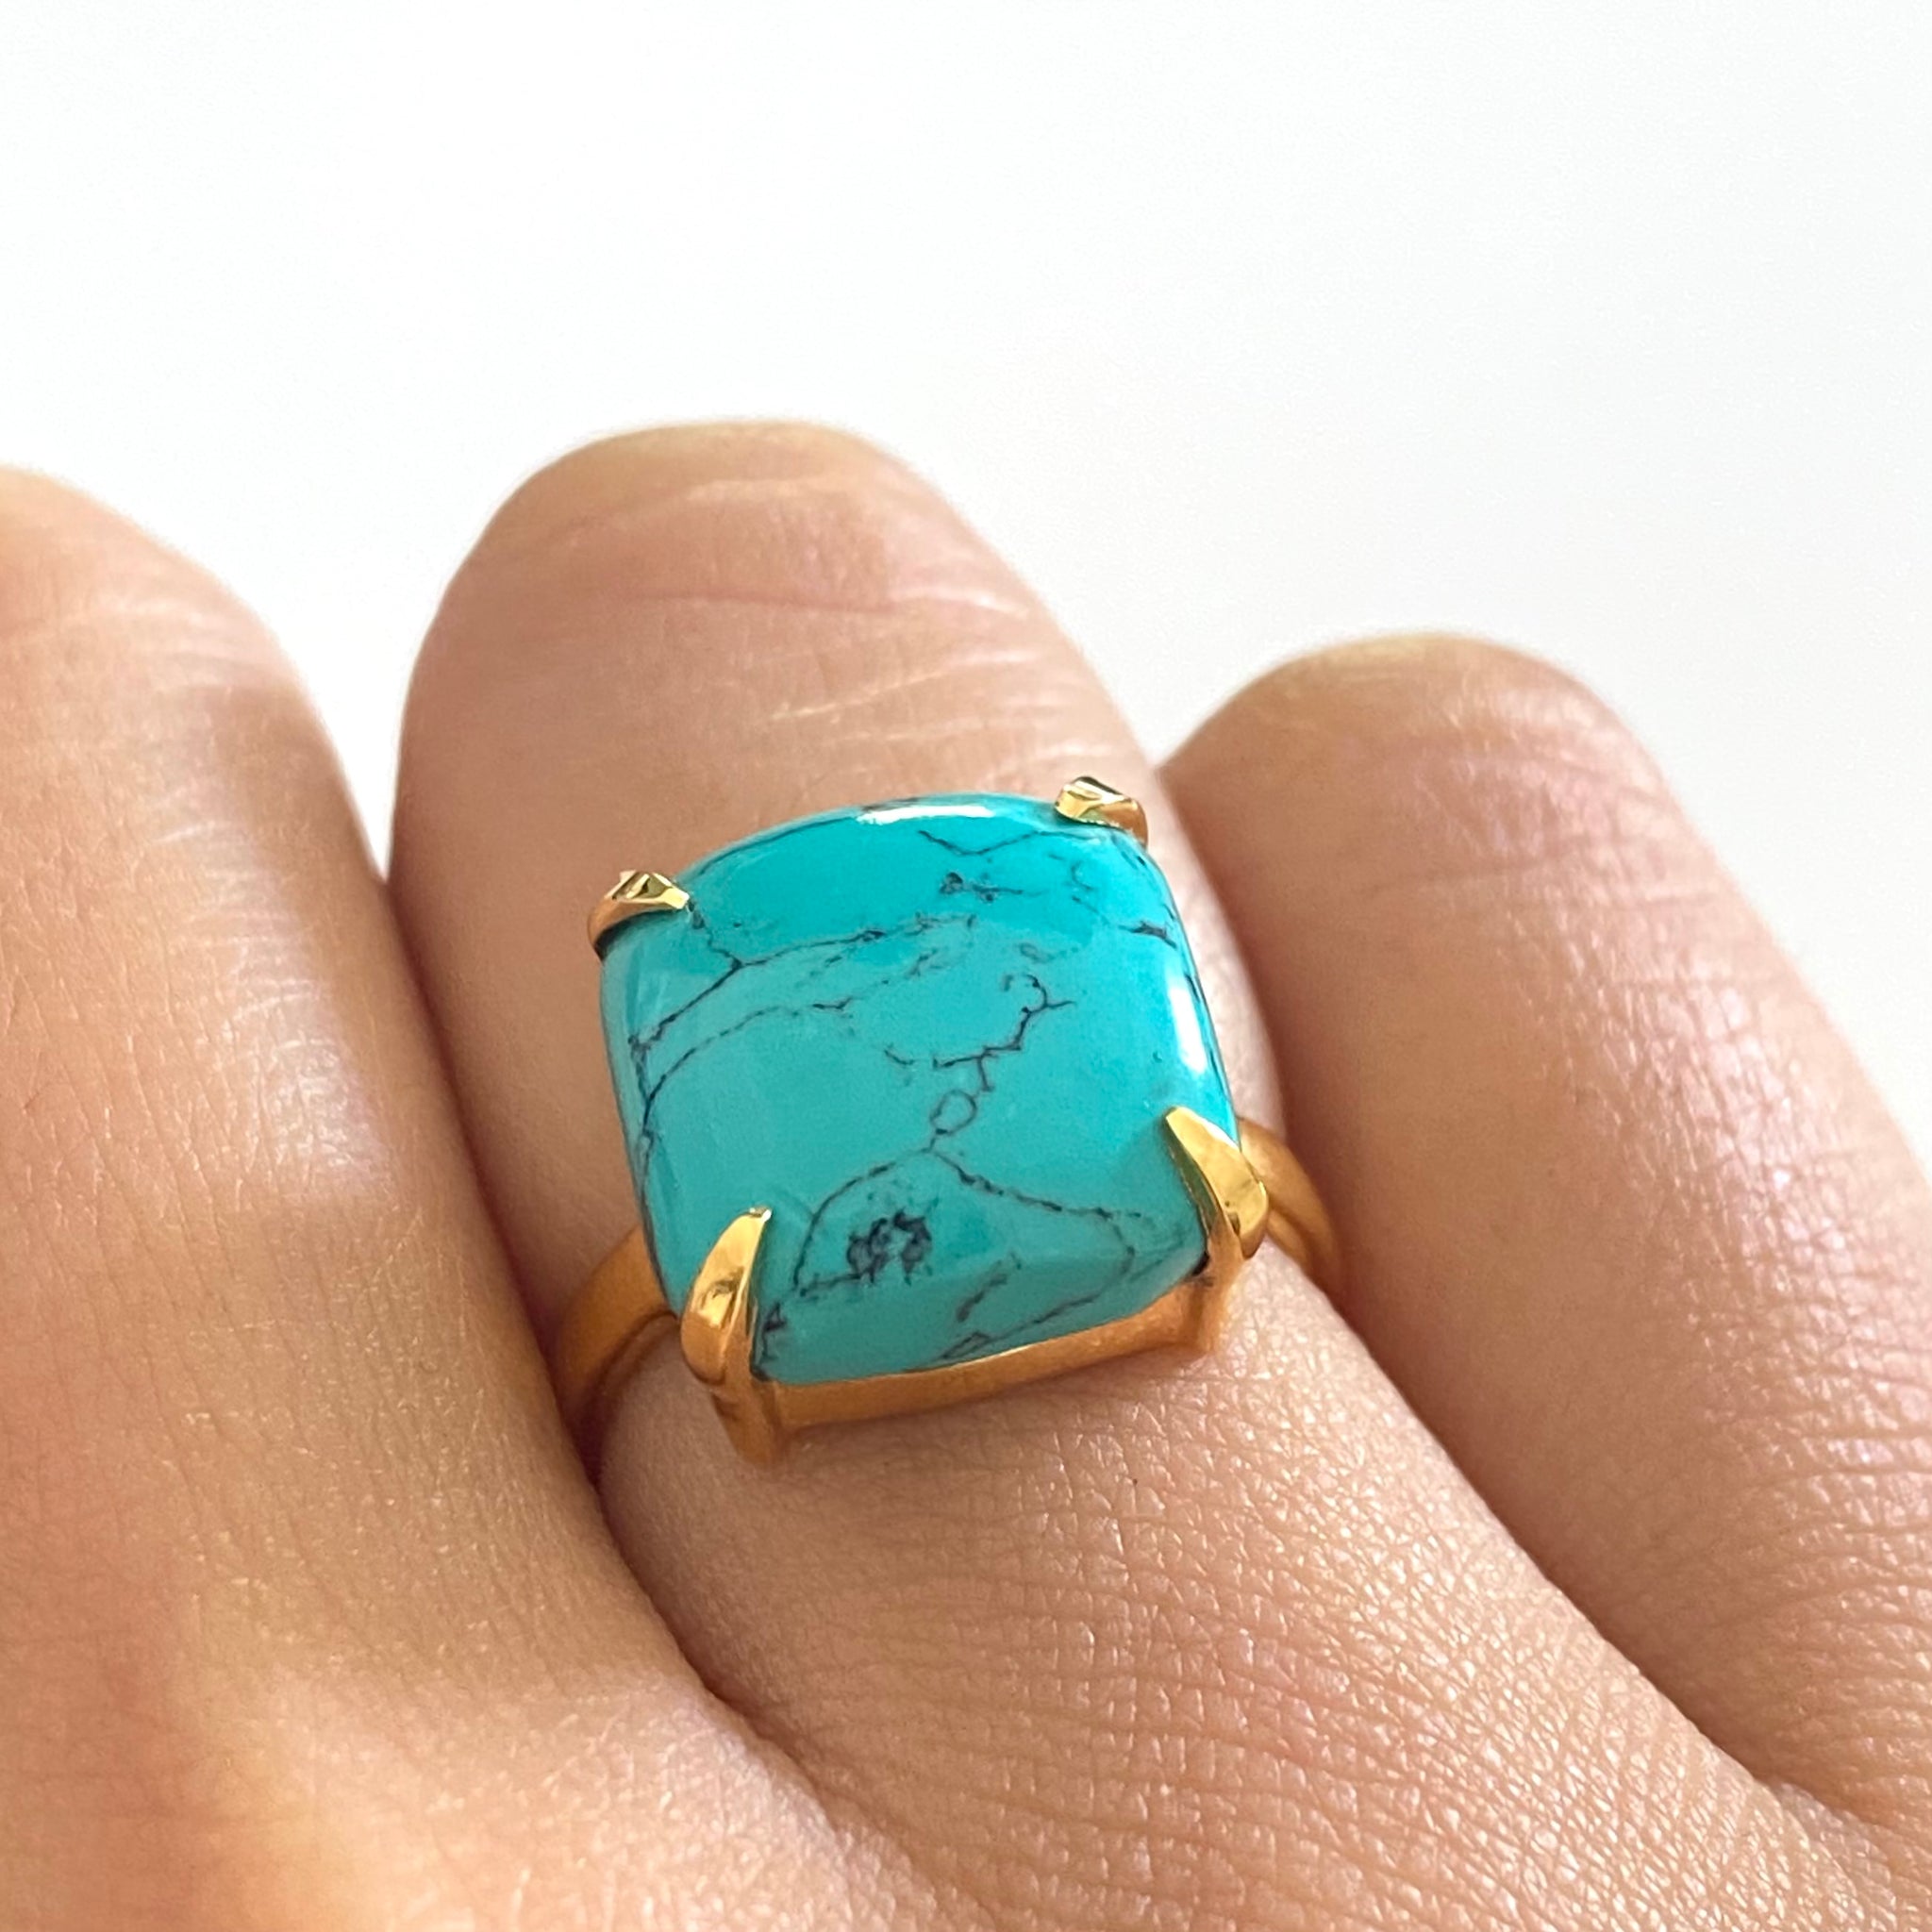 Buy Men Handmade Turquoise Stone Ring , Silver Bullet Model Ring , Square  Turquoise Stone Ring , 925k Sterling Silver Ring , Gift for Him Online in  India - Etsy